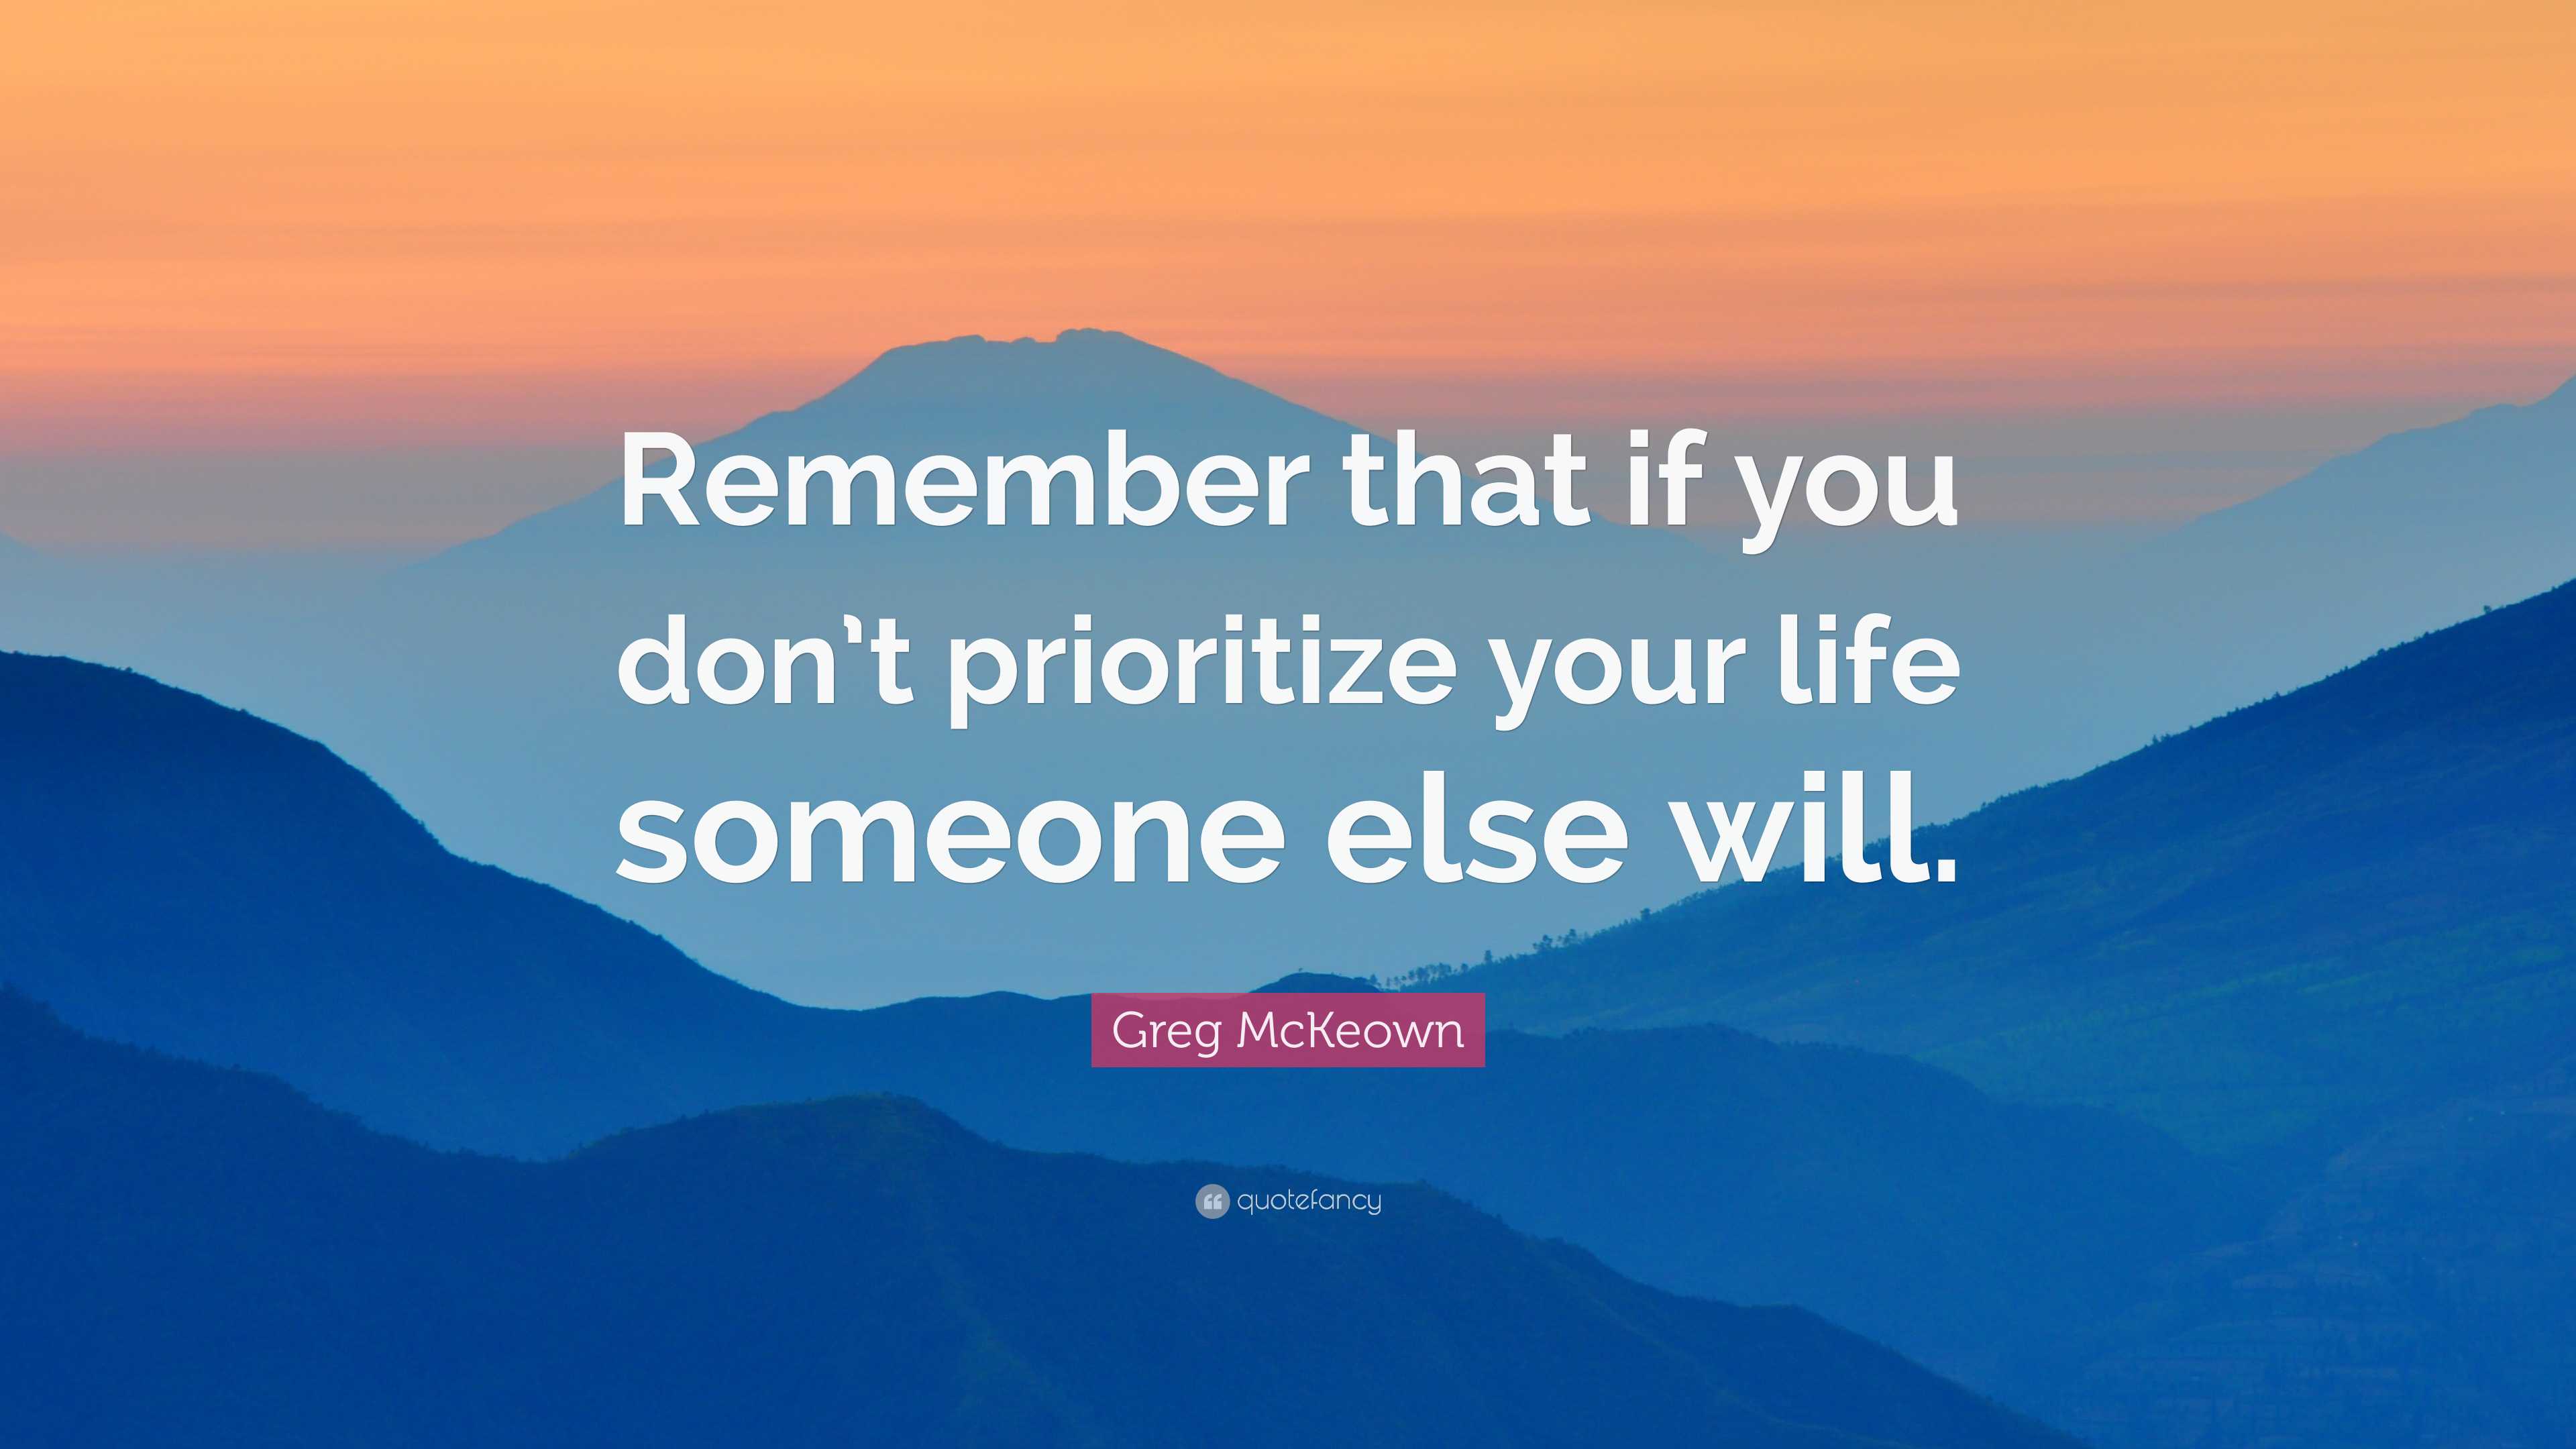 If You Don't Prioritize Your Life, Someone Else Will - Further